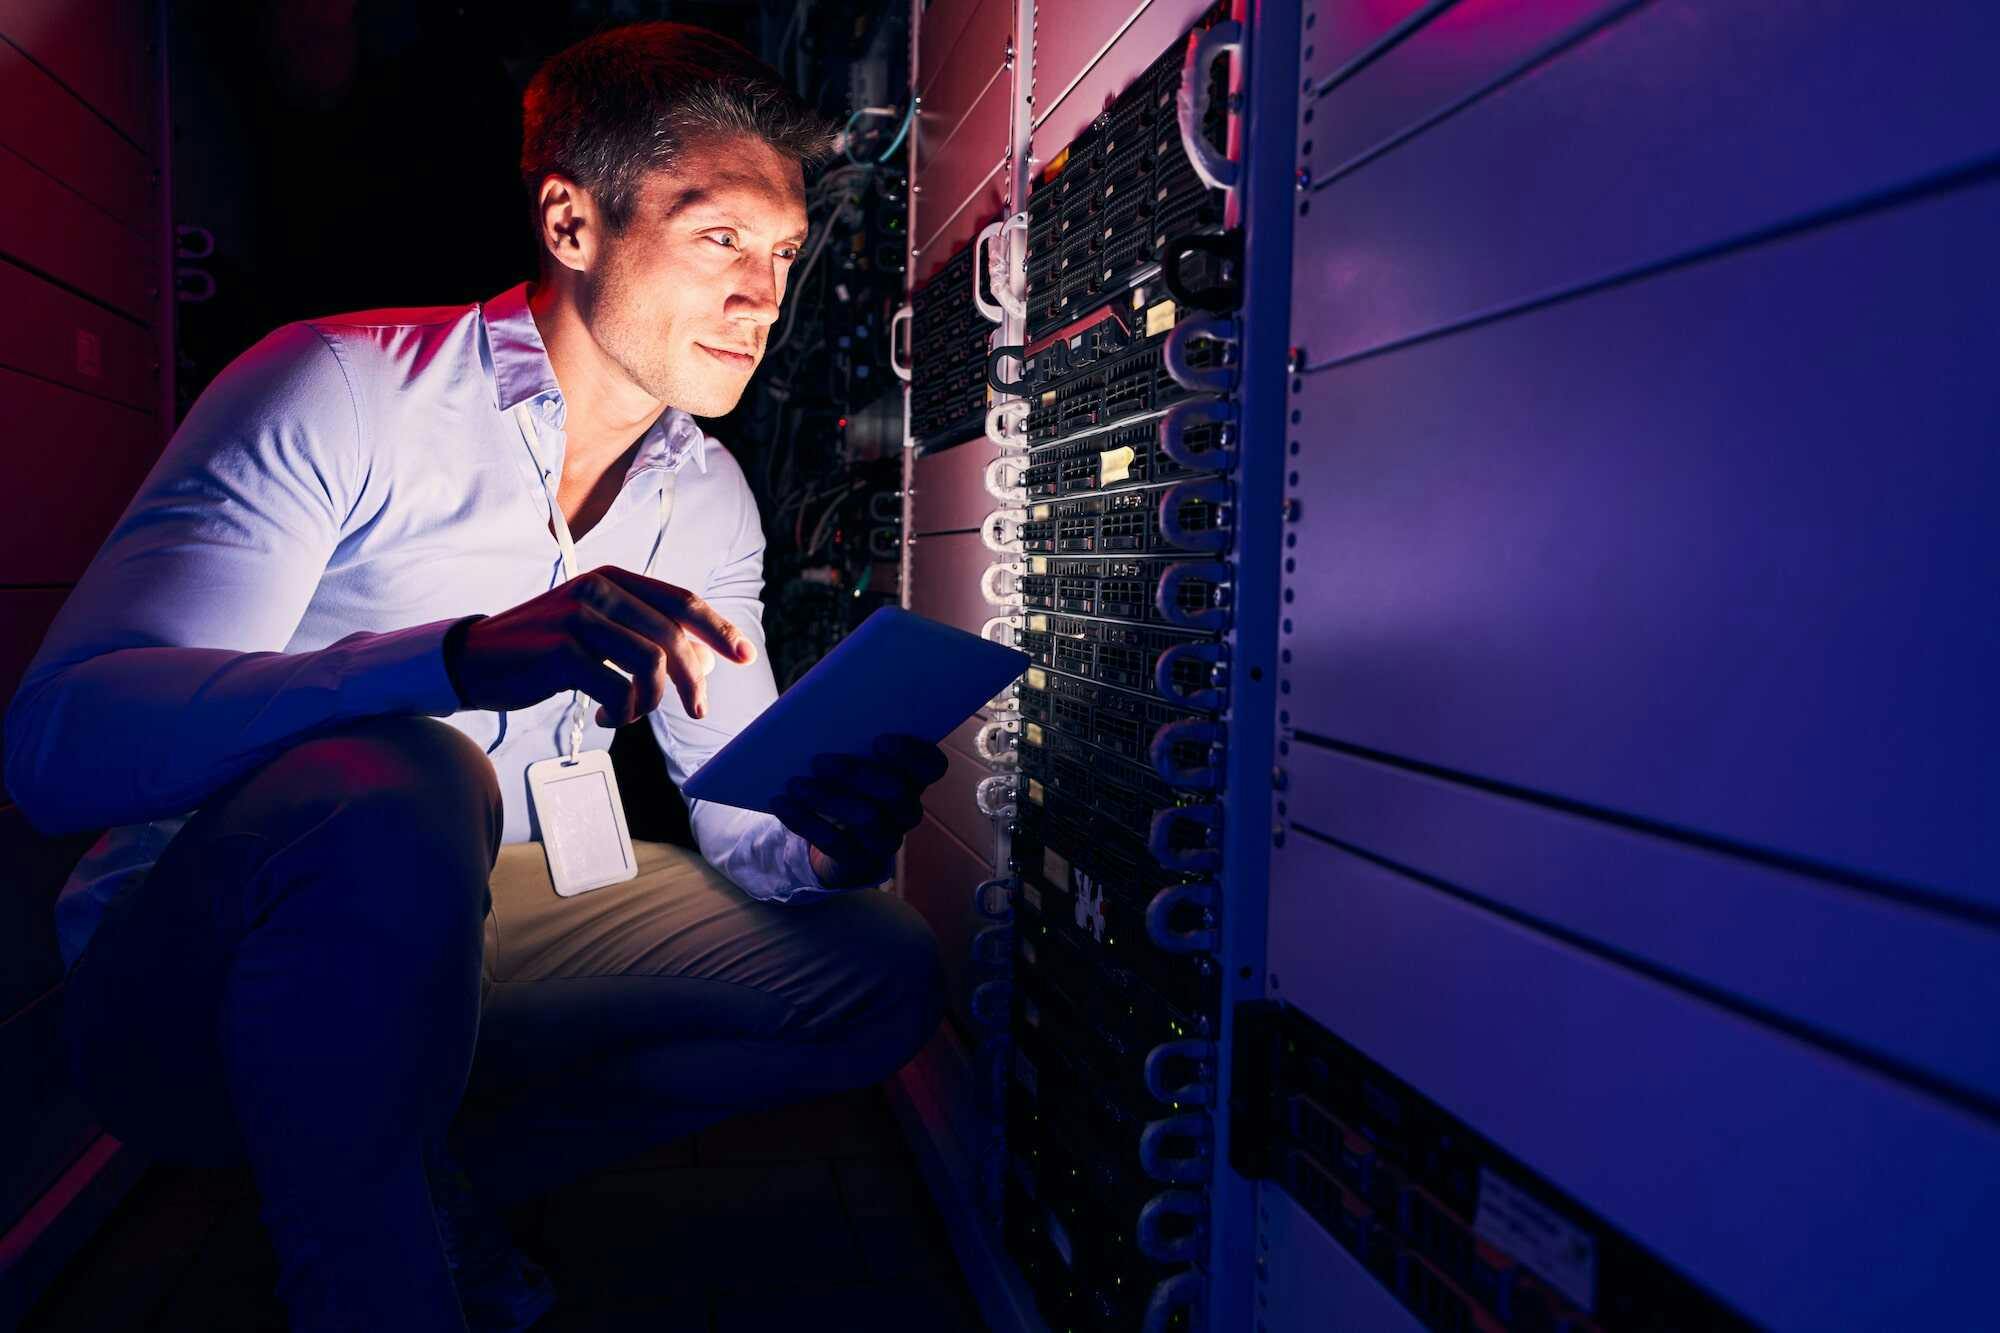 guy carefully looking for flaws in data center